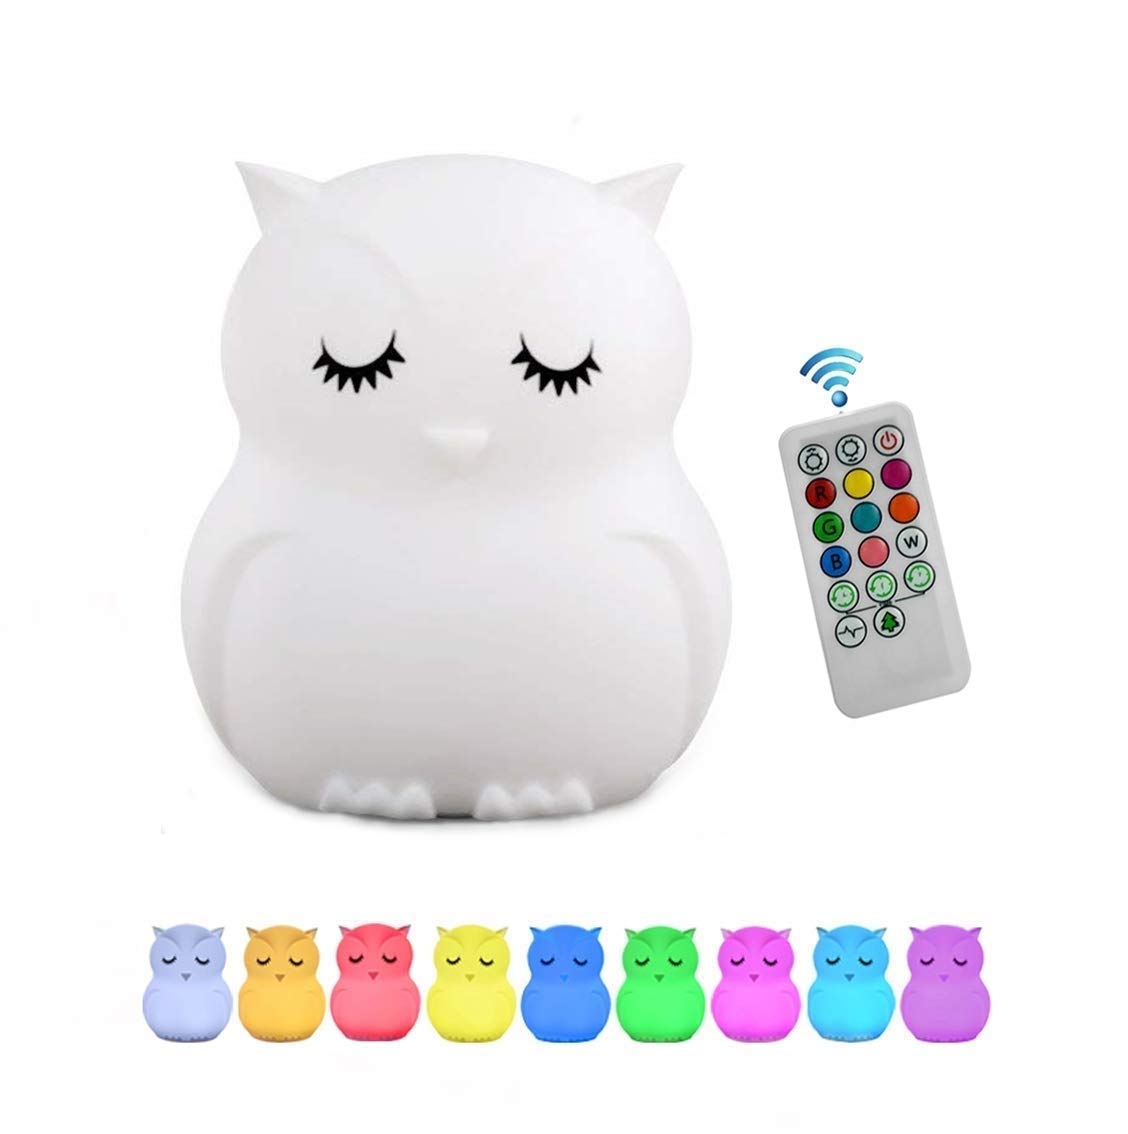 Tianhaixing Owl Night Light for Kids, Rechargeable LED Bedside Lamp for Children, 9 Changing Color Silicone Nursery Lamp for Bre